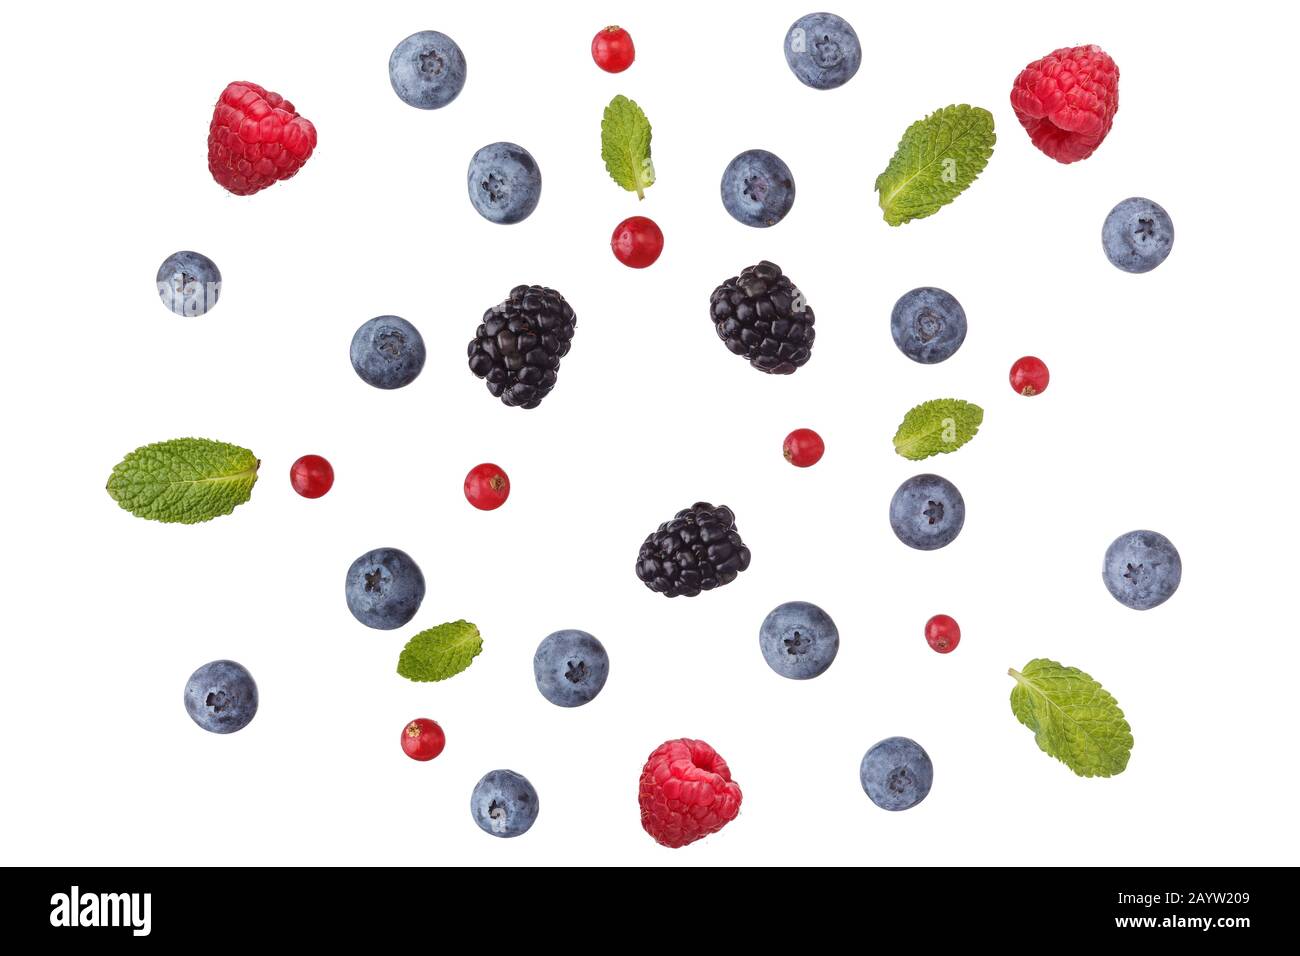 Mix of different berries isolated on white background. Stock Photo